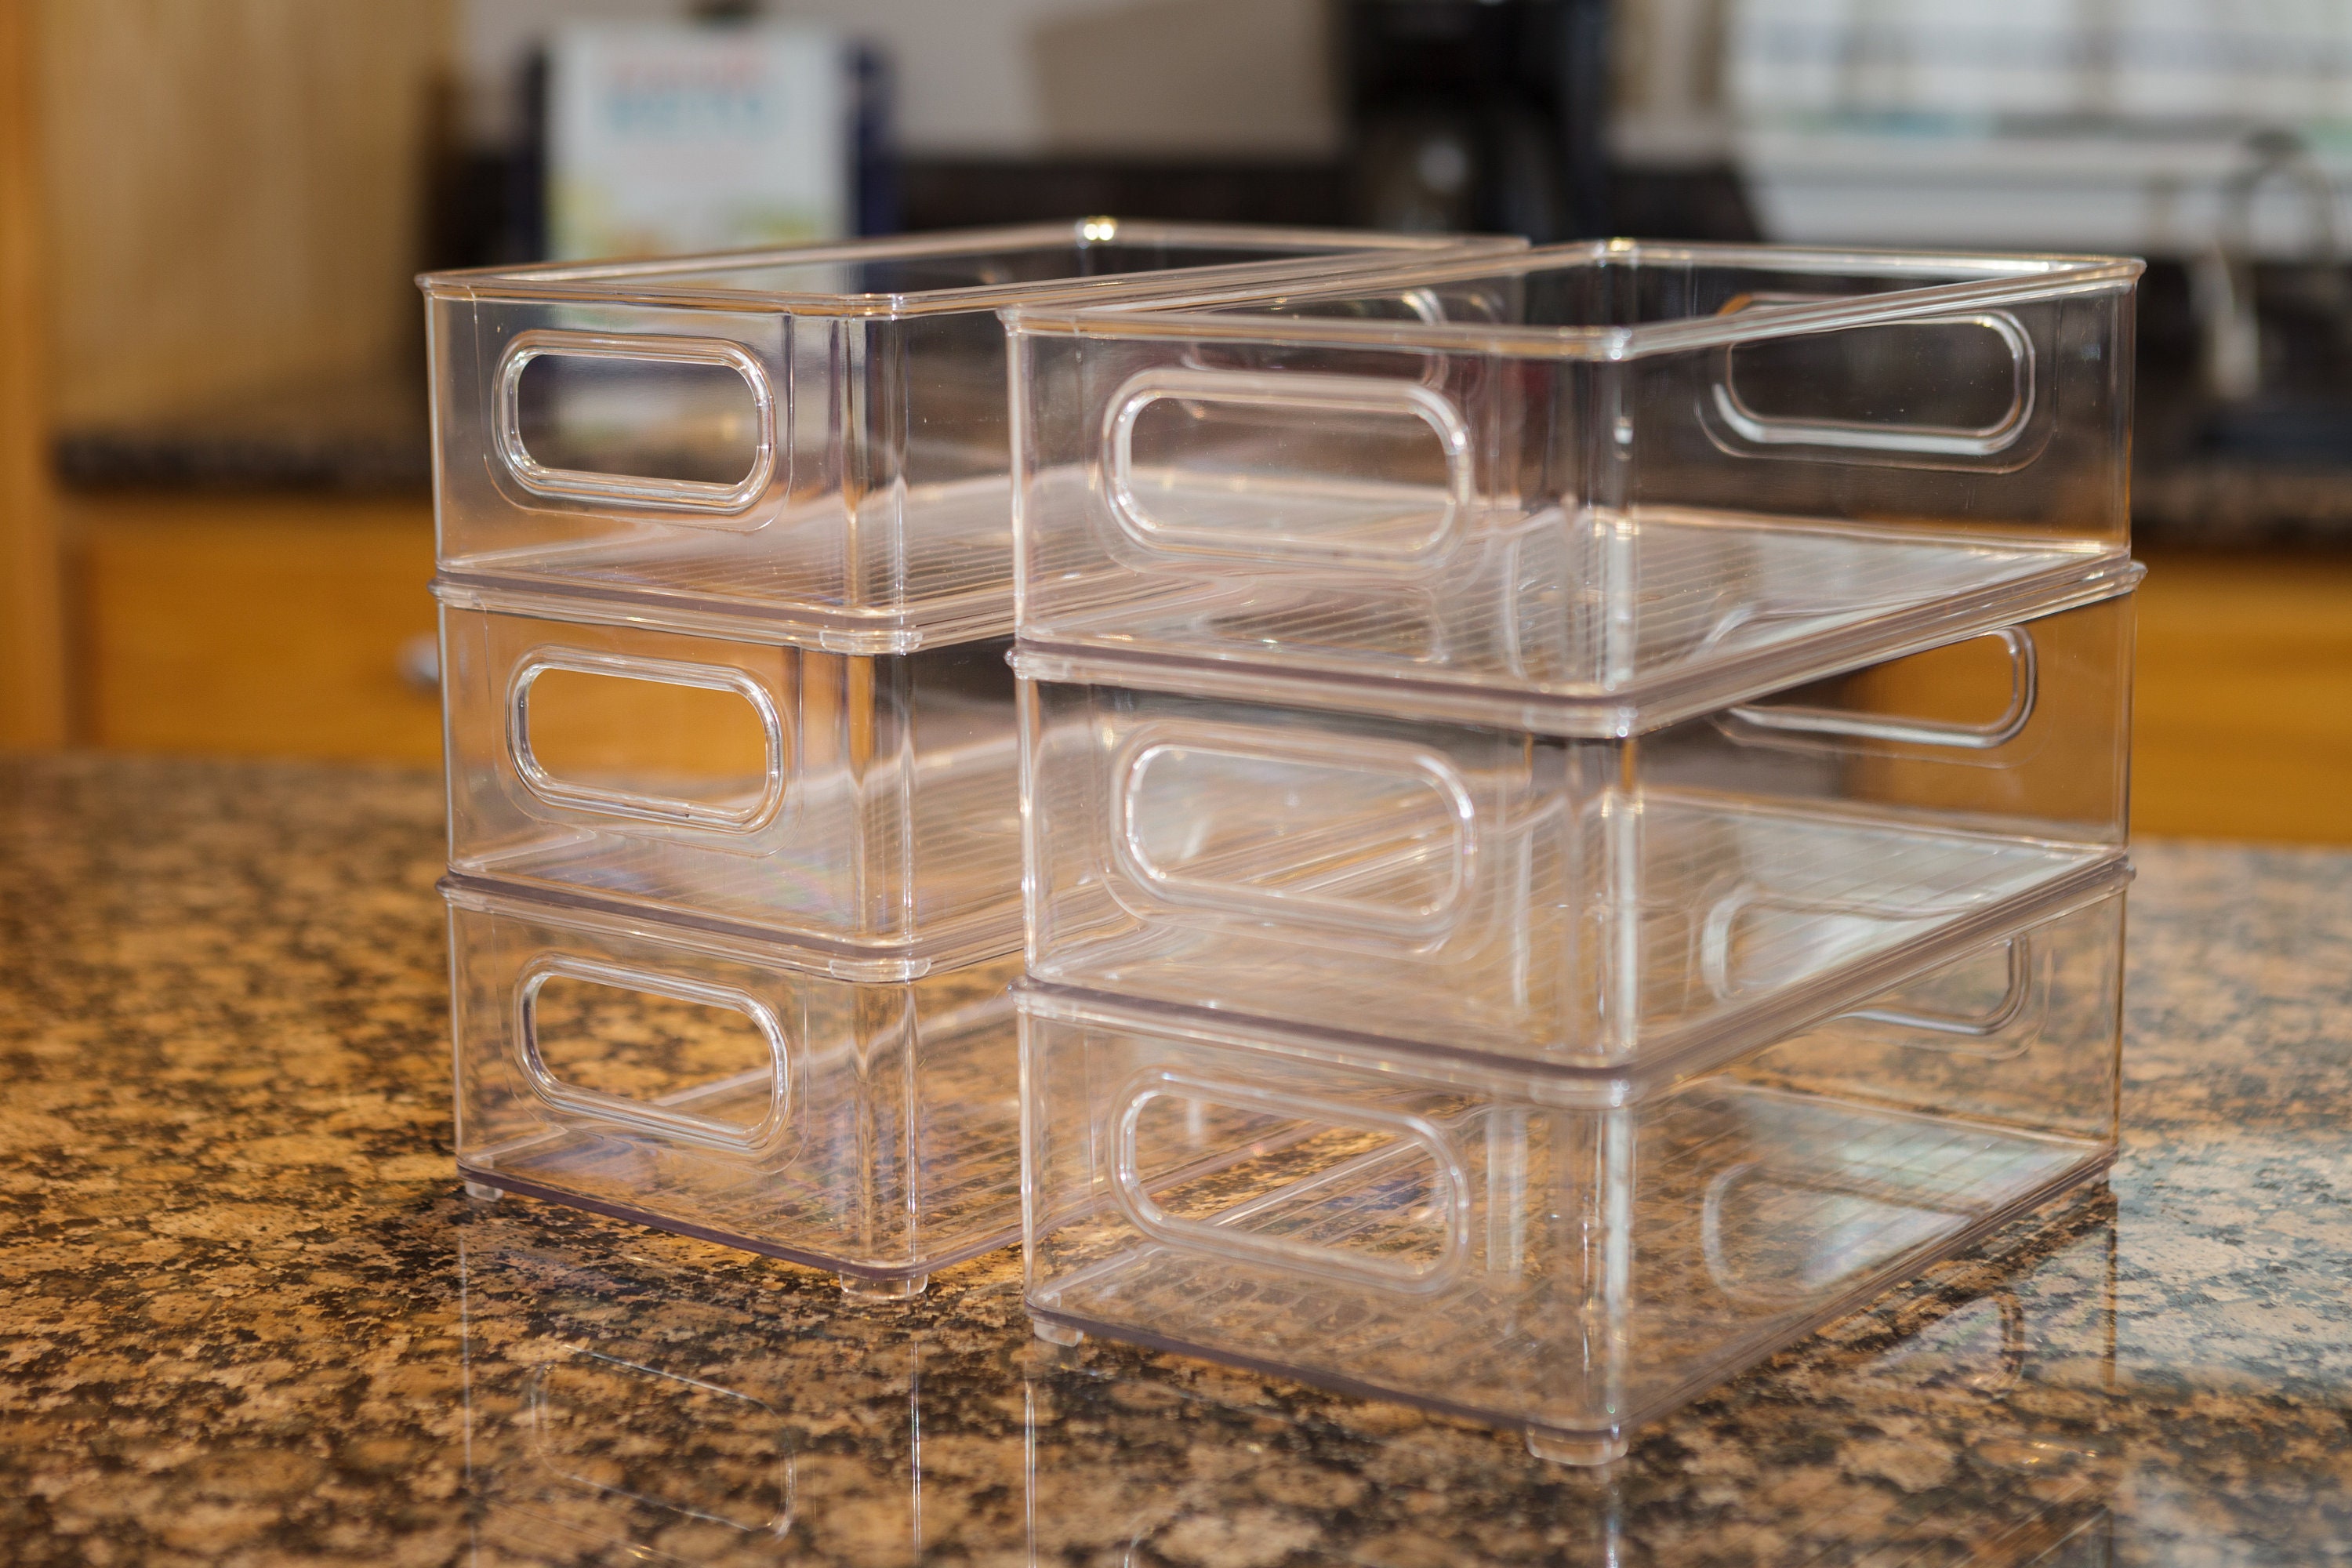 Buy 6 Pack Stackable Storage Solutions. Clear Organizer Bins With Handle  for Craft Storage, Fridge and Pantry Organization. Online in India 